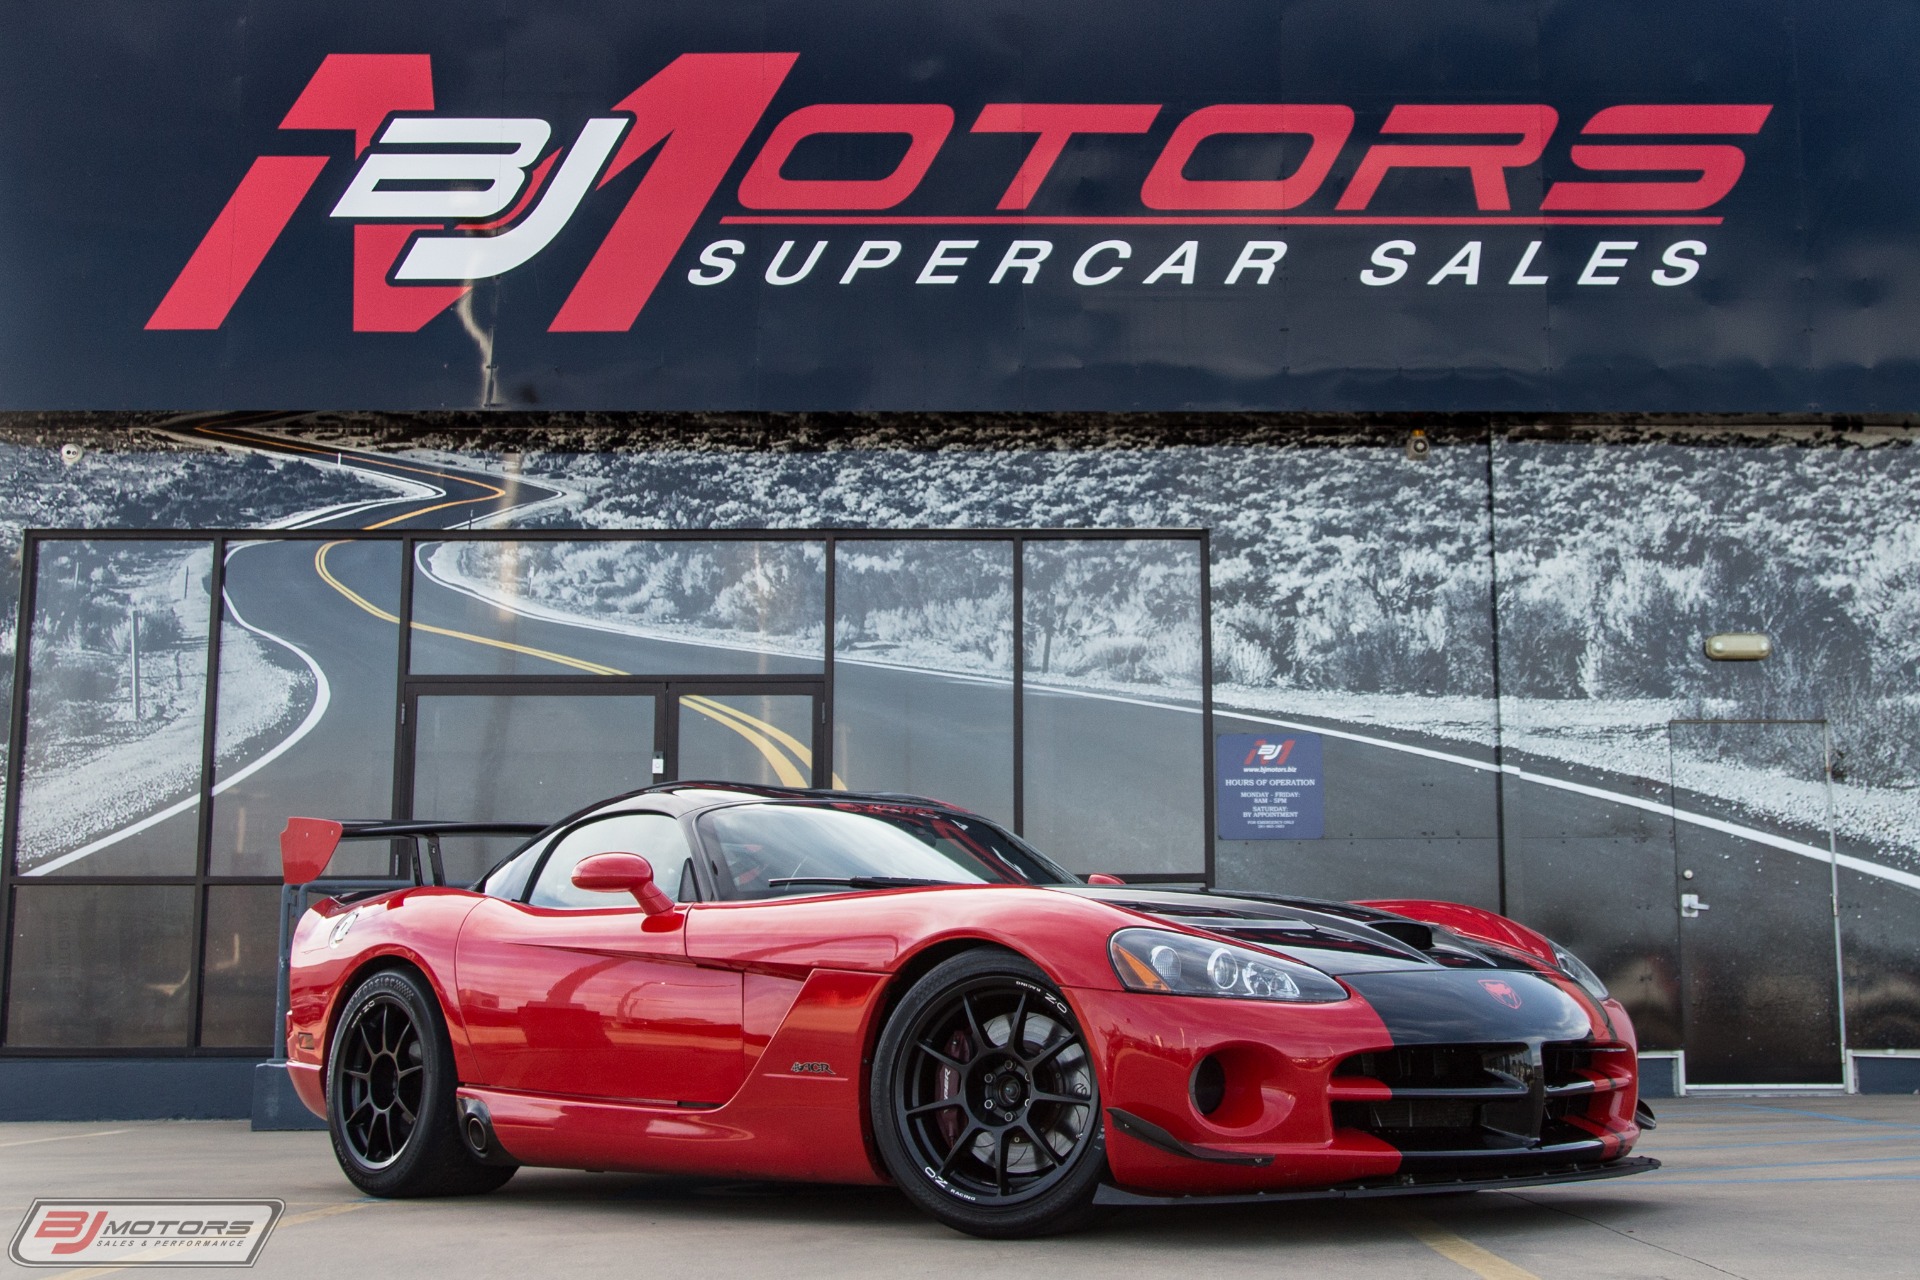 Used 08 Dodge Viper Srt 10 Acr X Clone For Sale Special Pricing Bj Motors Stock 8v1144